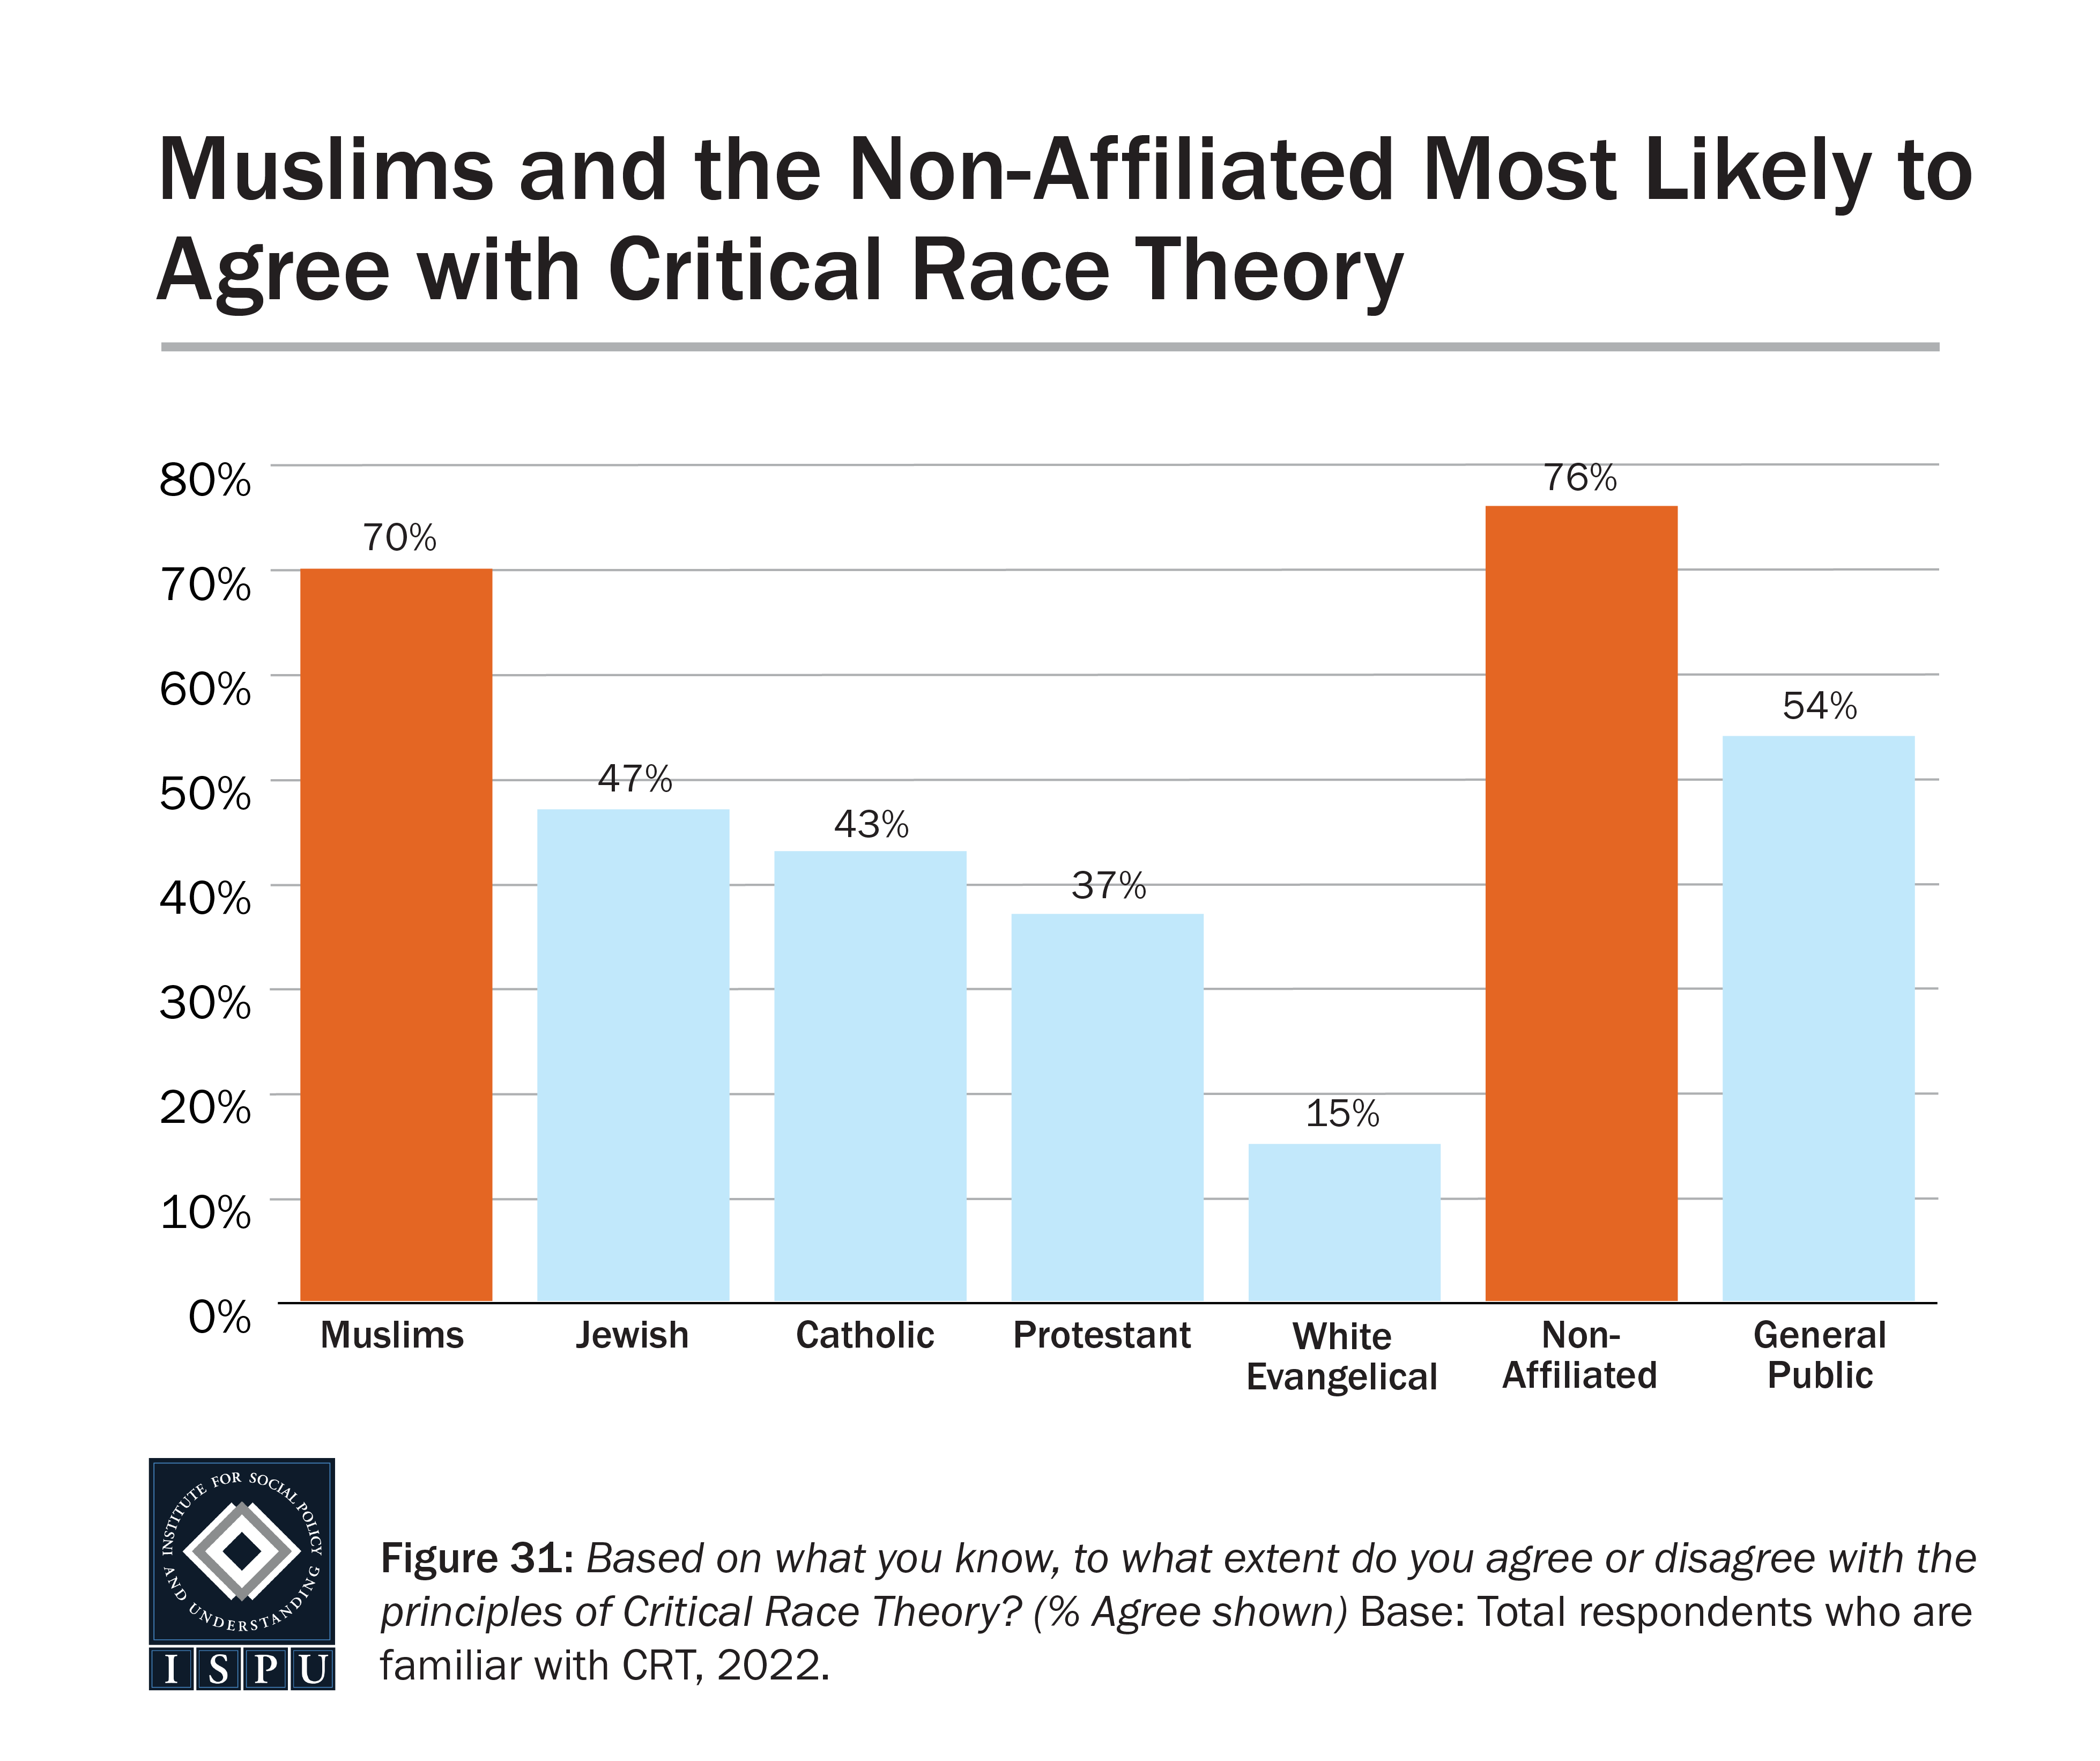 A bar graph showing agreement with the principle of Critical Race Theory among those who report being familiar with it in all groups surveyed.